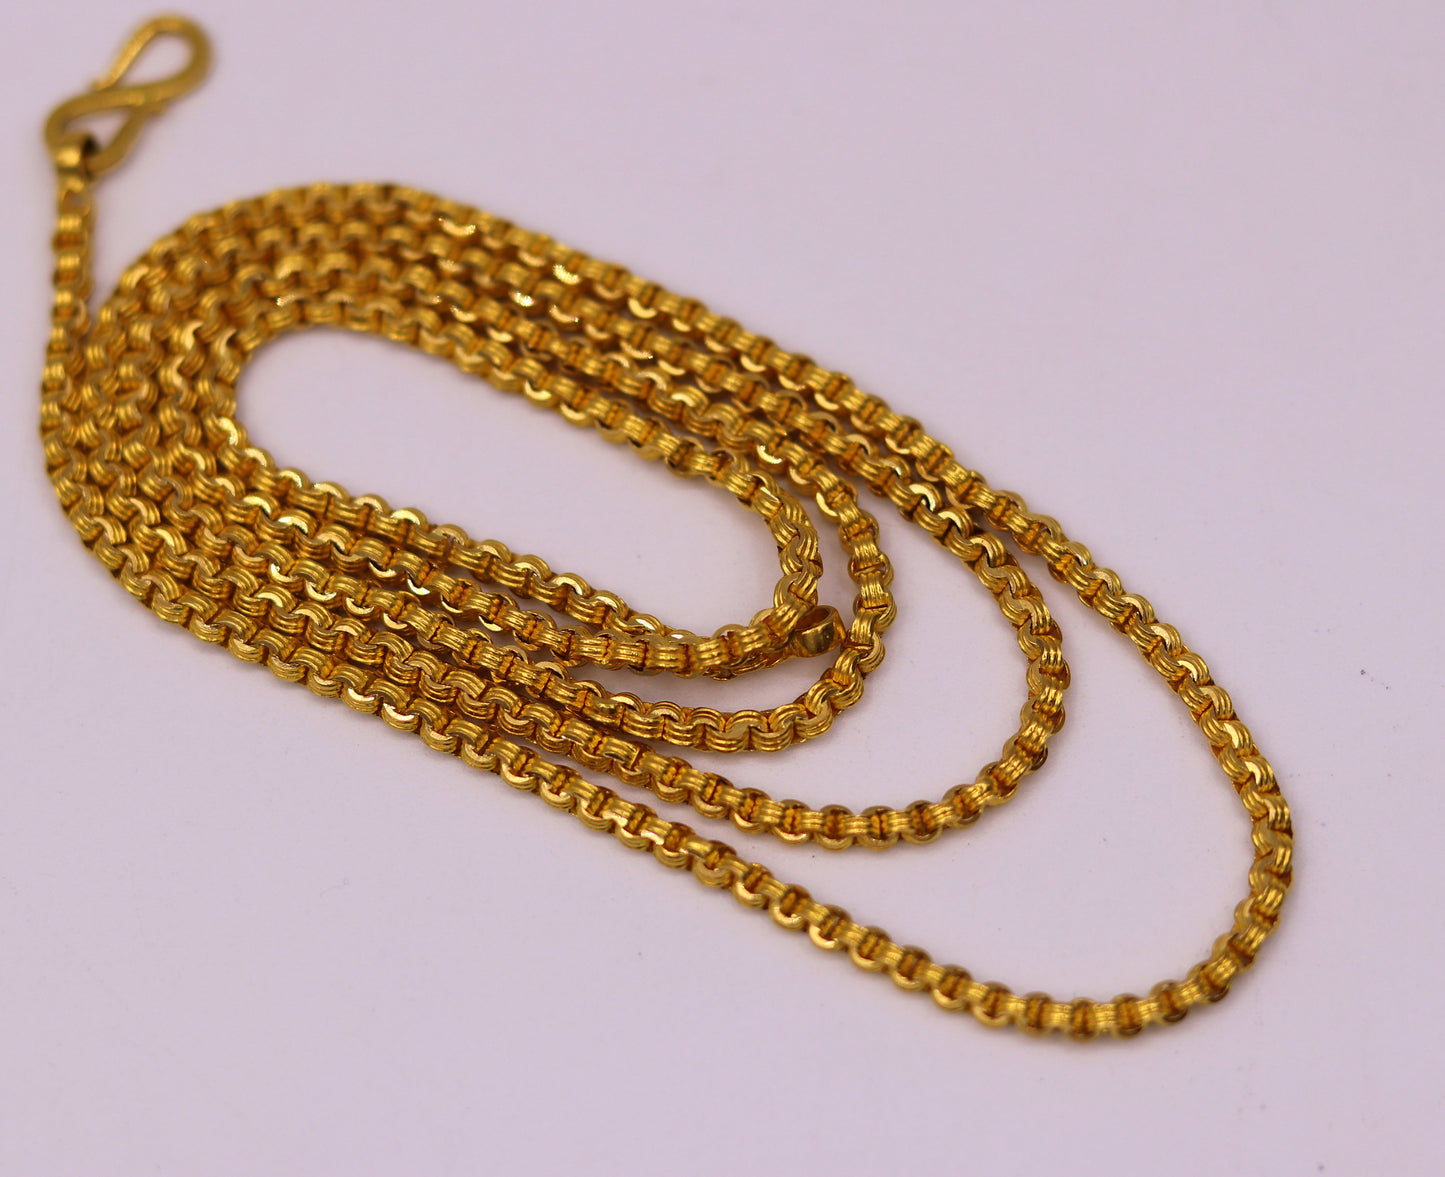 solid 22karat yellow gold handmade amazing rolo link chain necklace unisex 24 inches long chain gifting collection from india ch216 - TRIBAL ORNAMENTS